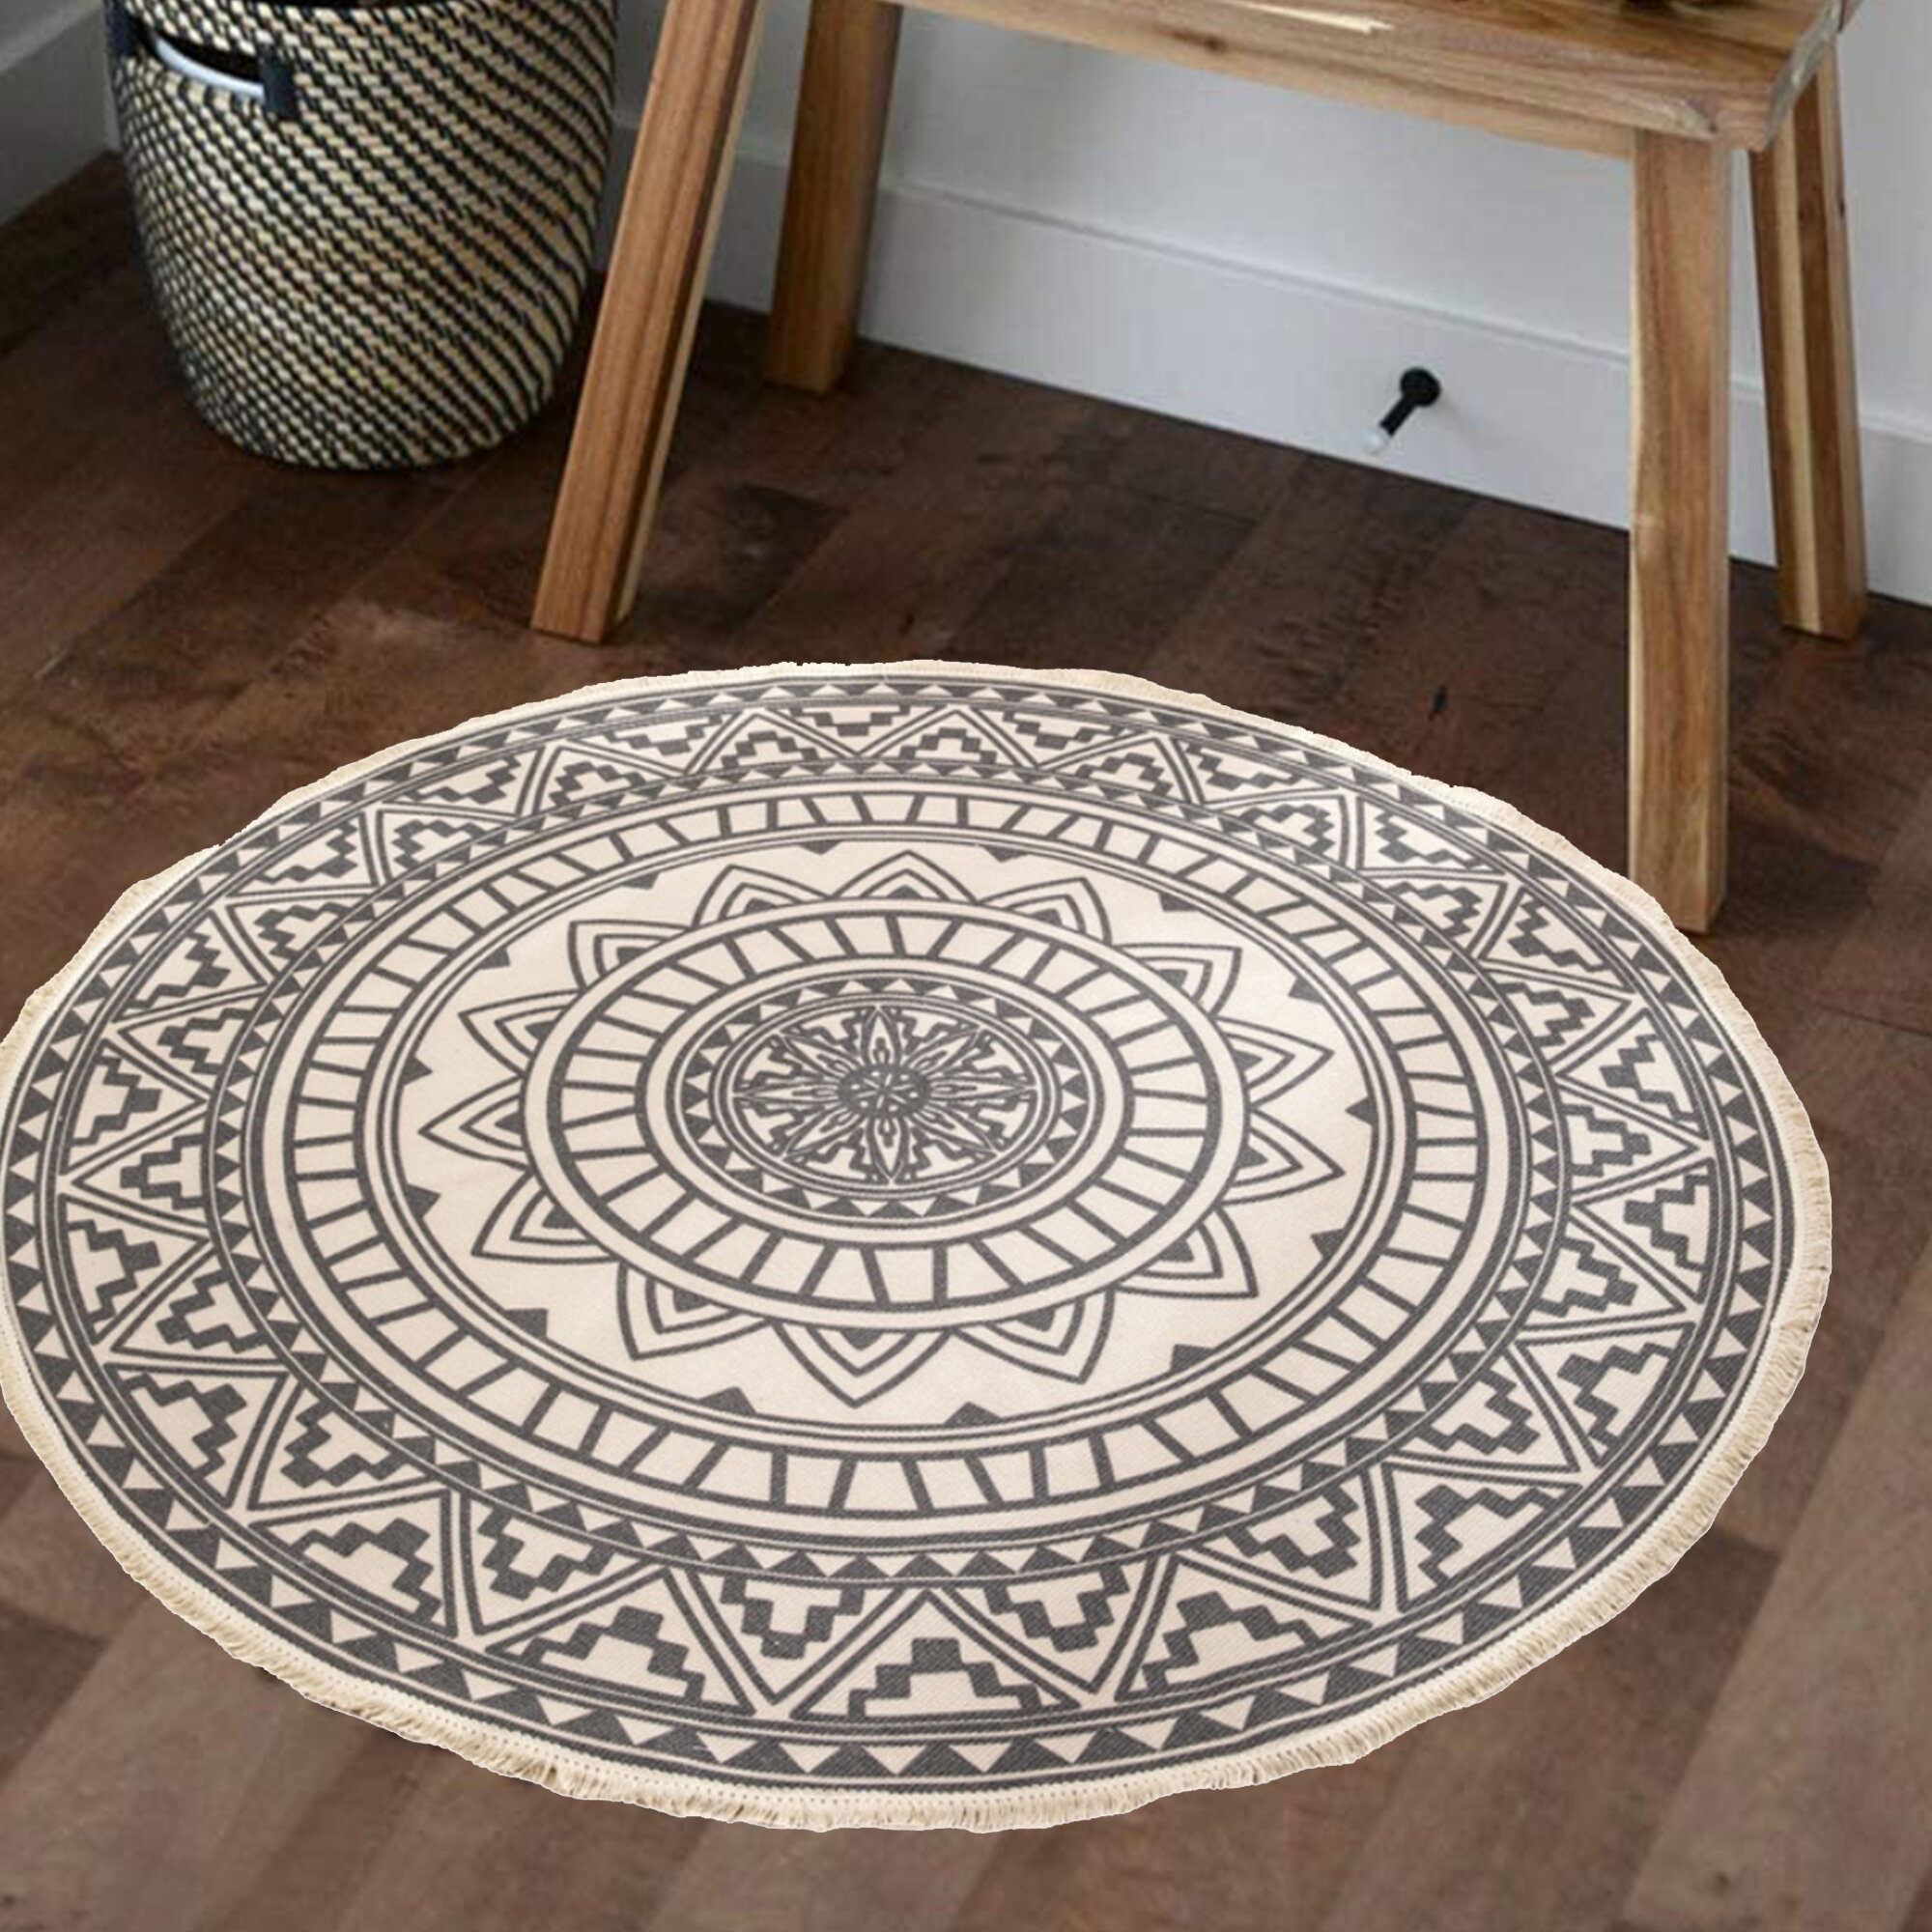 Round Area Rug Colorful Dog Paw Pattern 3ft Diameter Non-Slip Circle Rugs Soft Throw Rugs Machine Washable Floor Carpet for Sofa Living Room Bedroom Nursery Kids Playroom Decor 